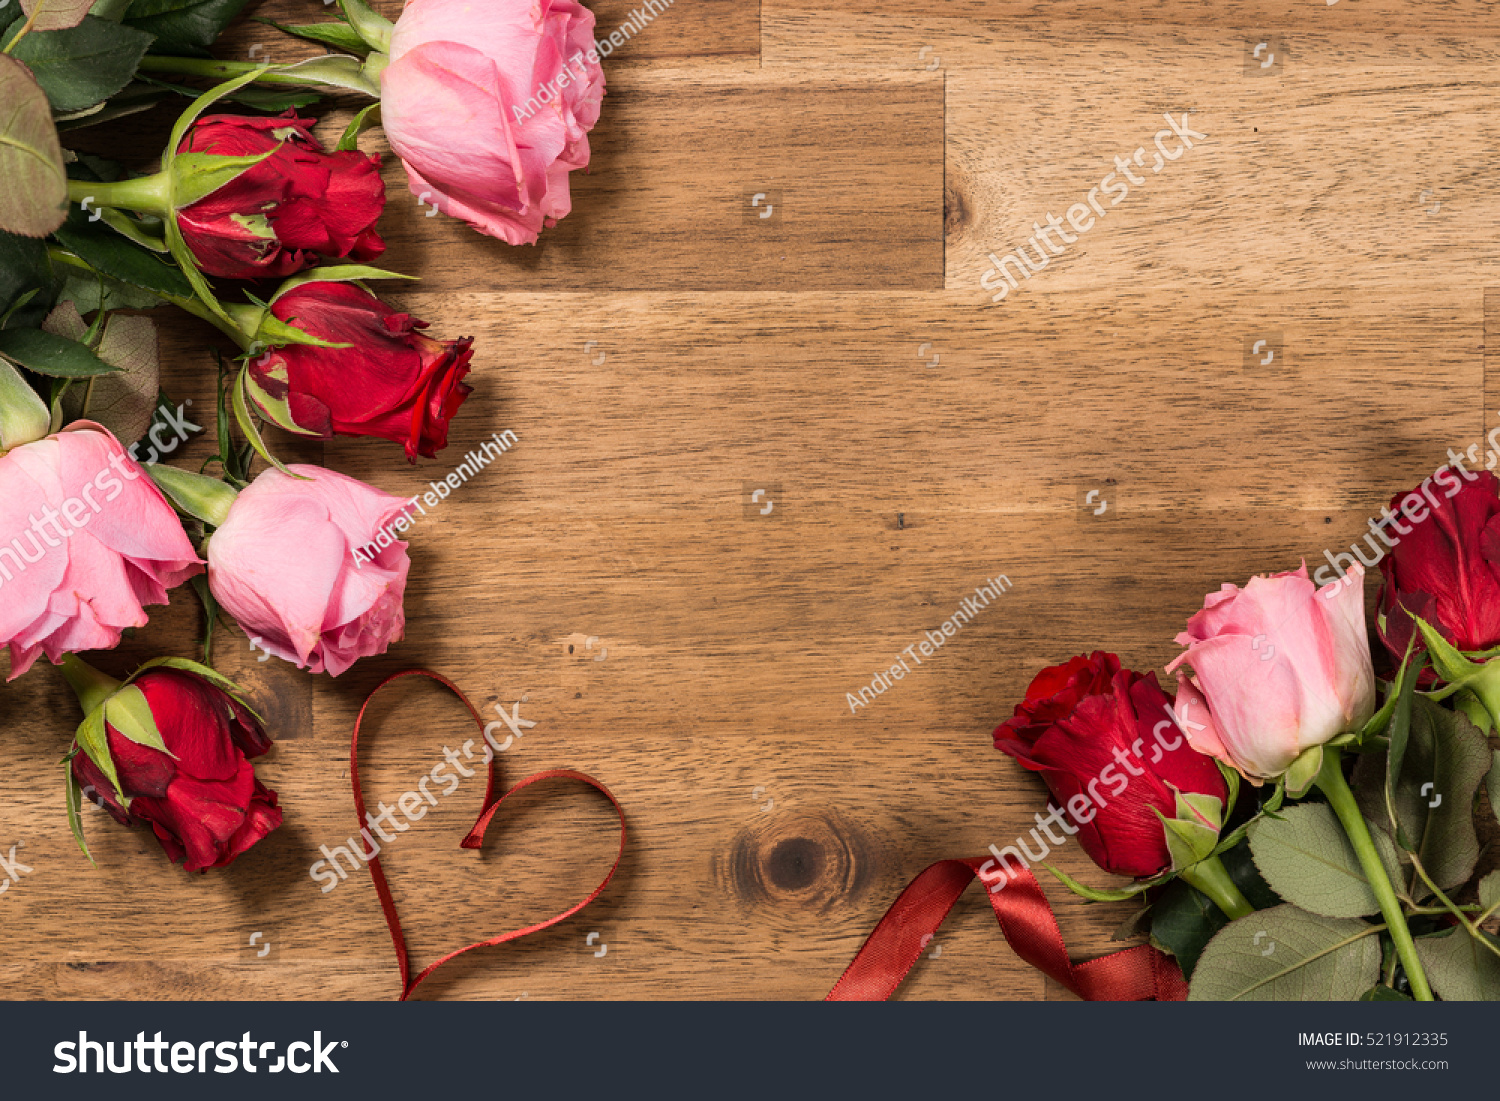 Roses  and red ribbon on wooden background. Valentines day background #521912335